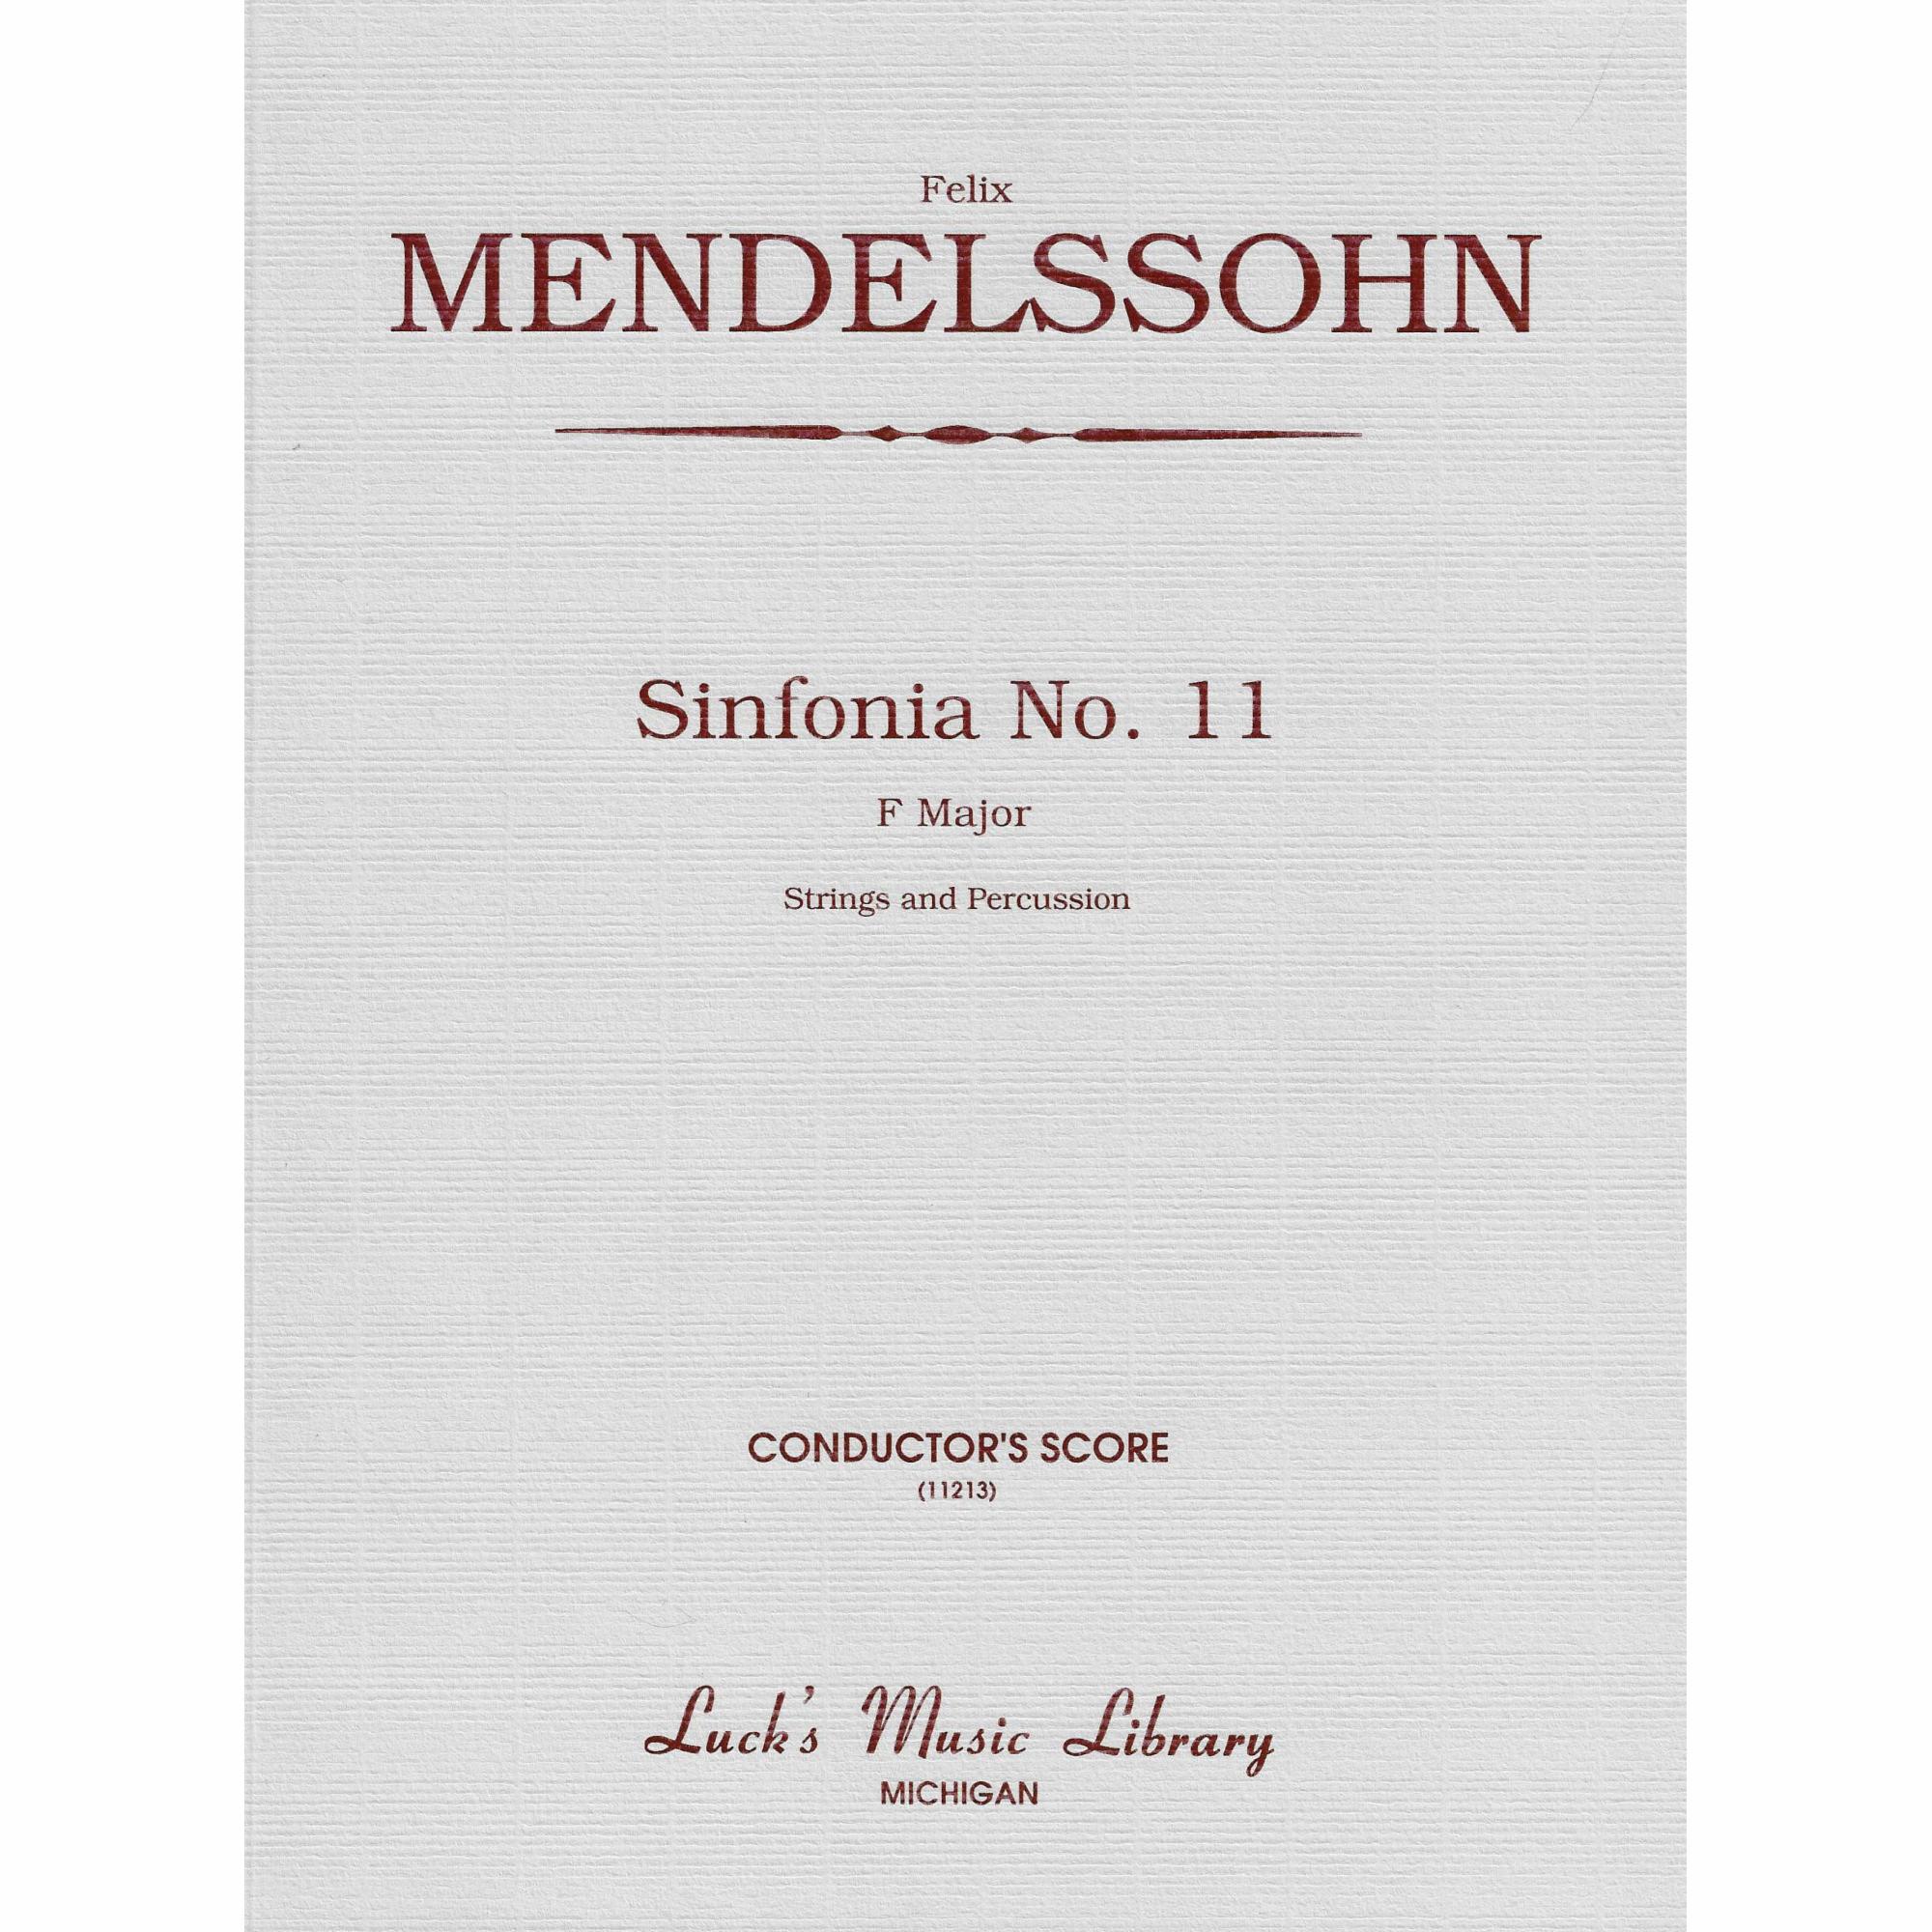 Mendelssohn -- Sinfonia No. 11 in F Major for String Orchestra and Percussion